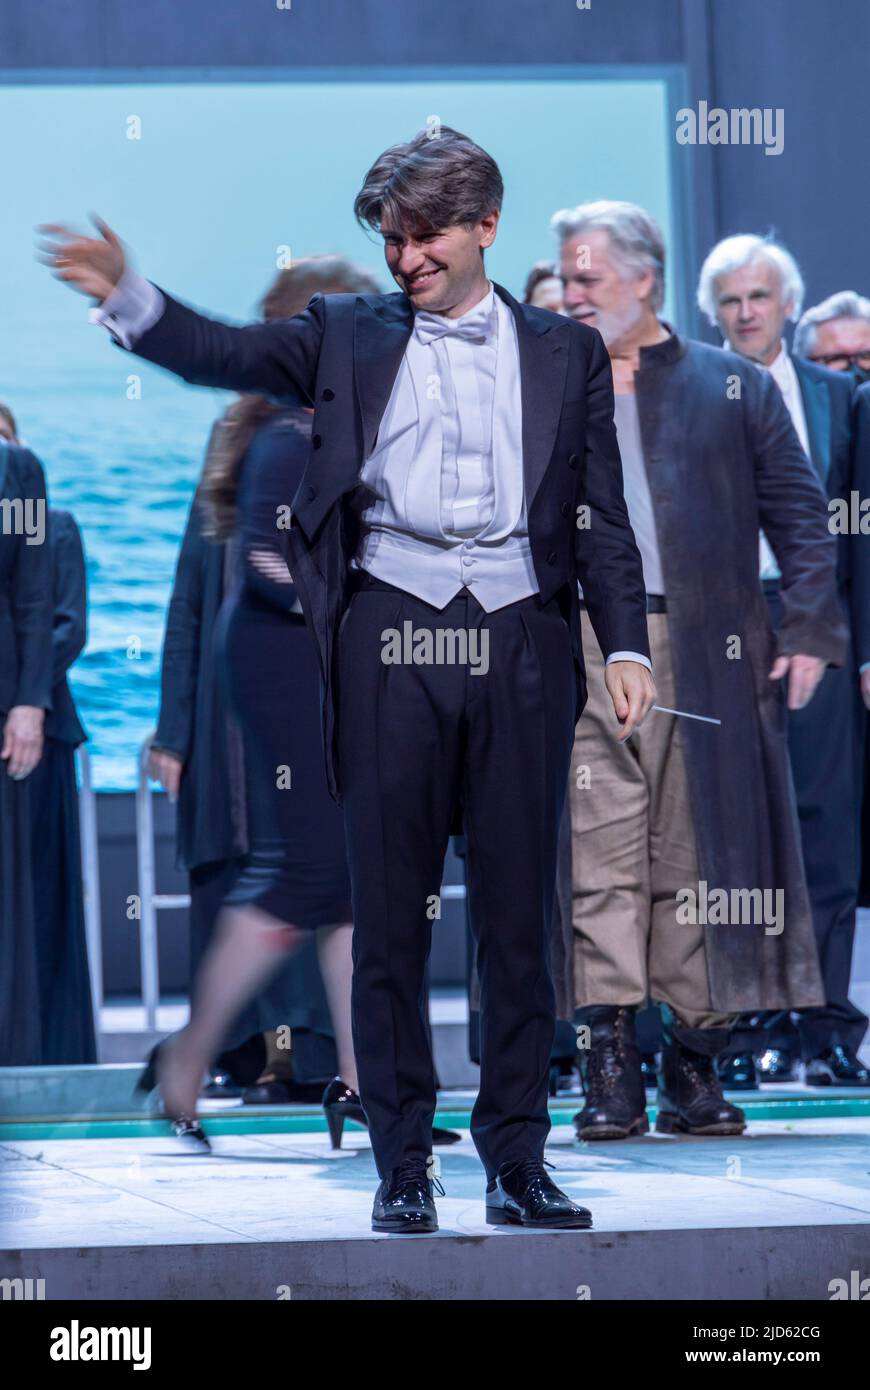 Curtain call of conductor Daniele Rustioni at Les Troyens, Nationaltheater, Munich Opera House, Bavaria, Germany. Stock Photo